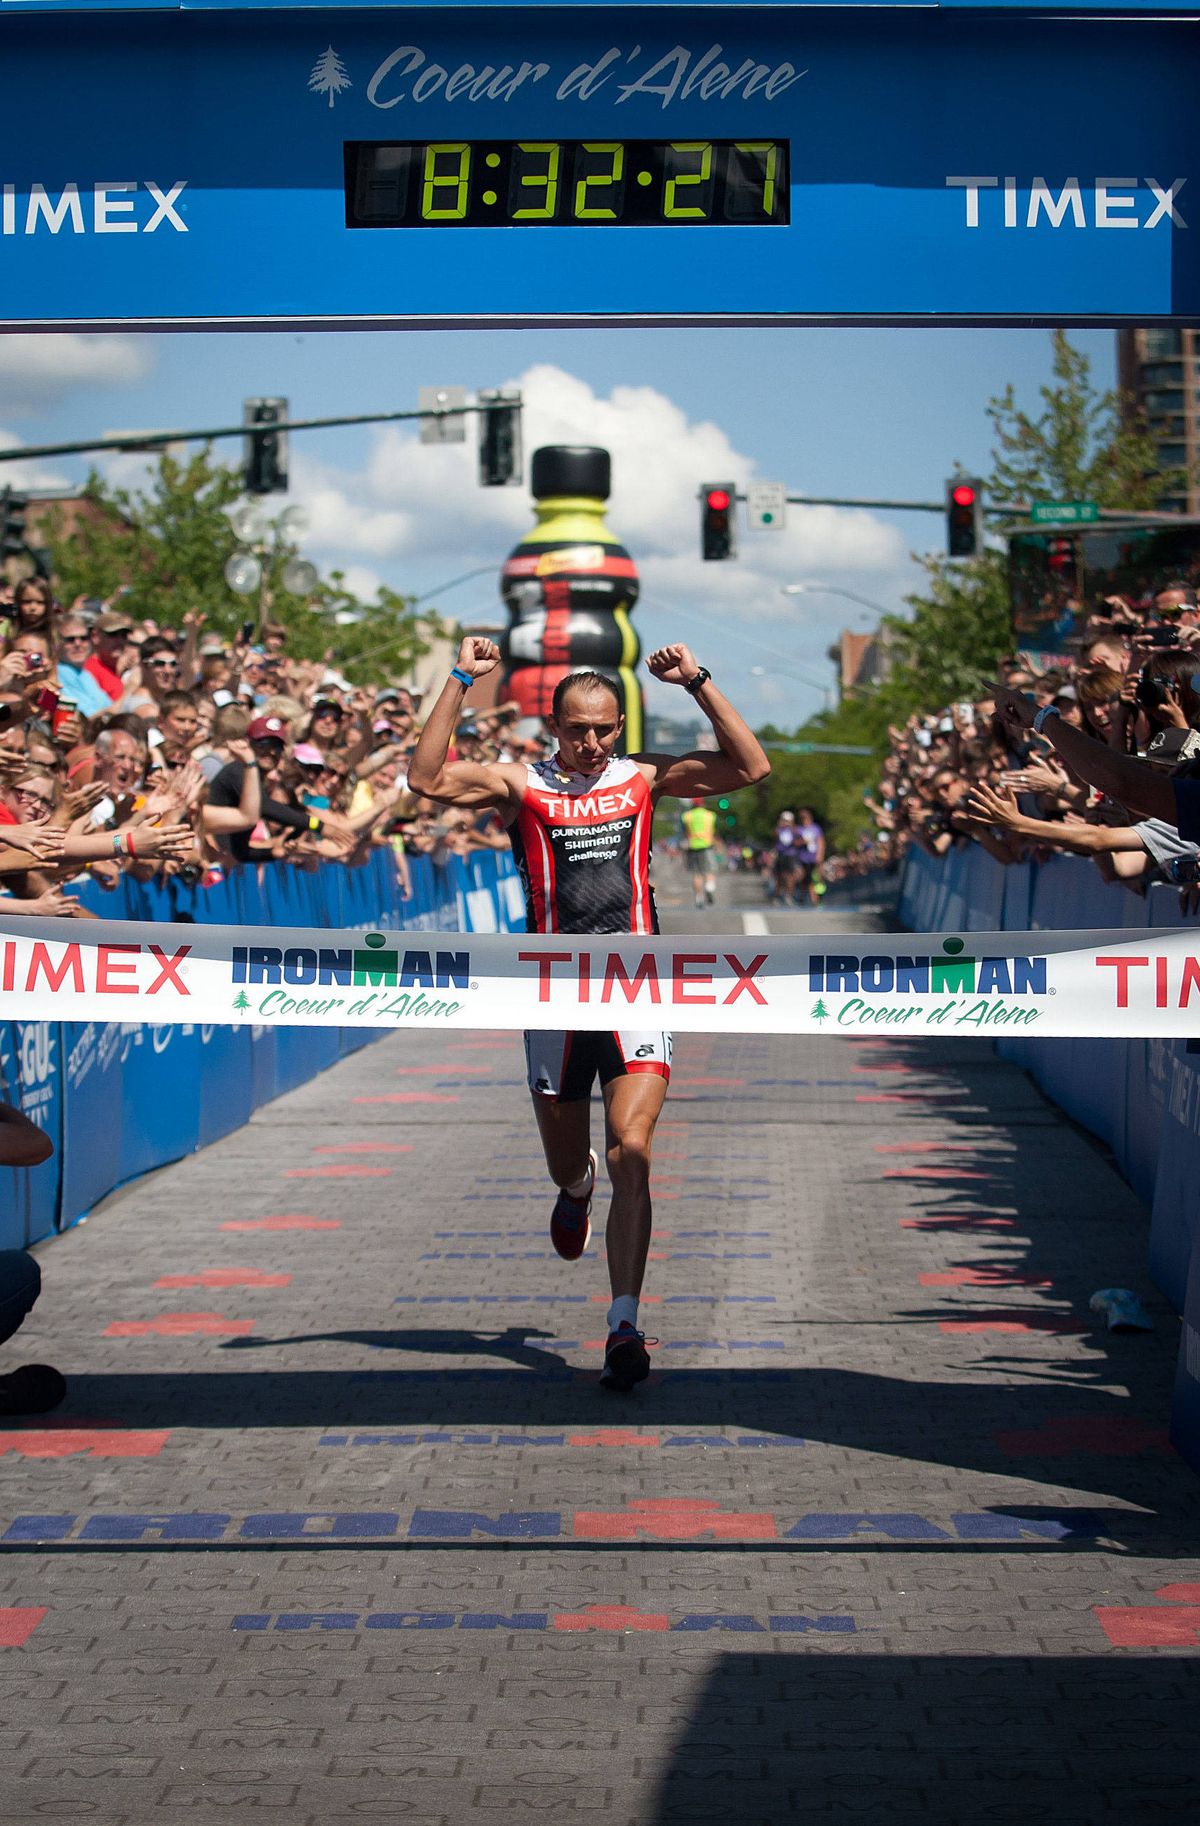 Viktor Zyemtsev approaches the finish line as he wins Ironman Coeur d